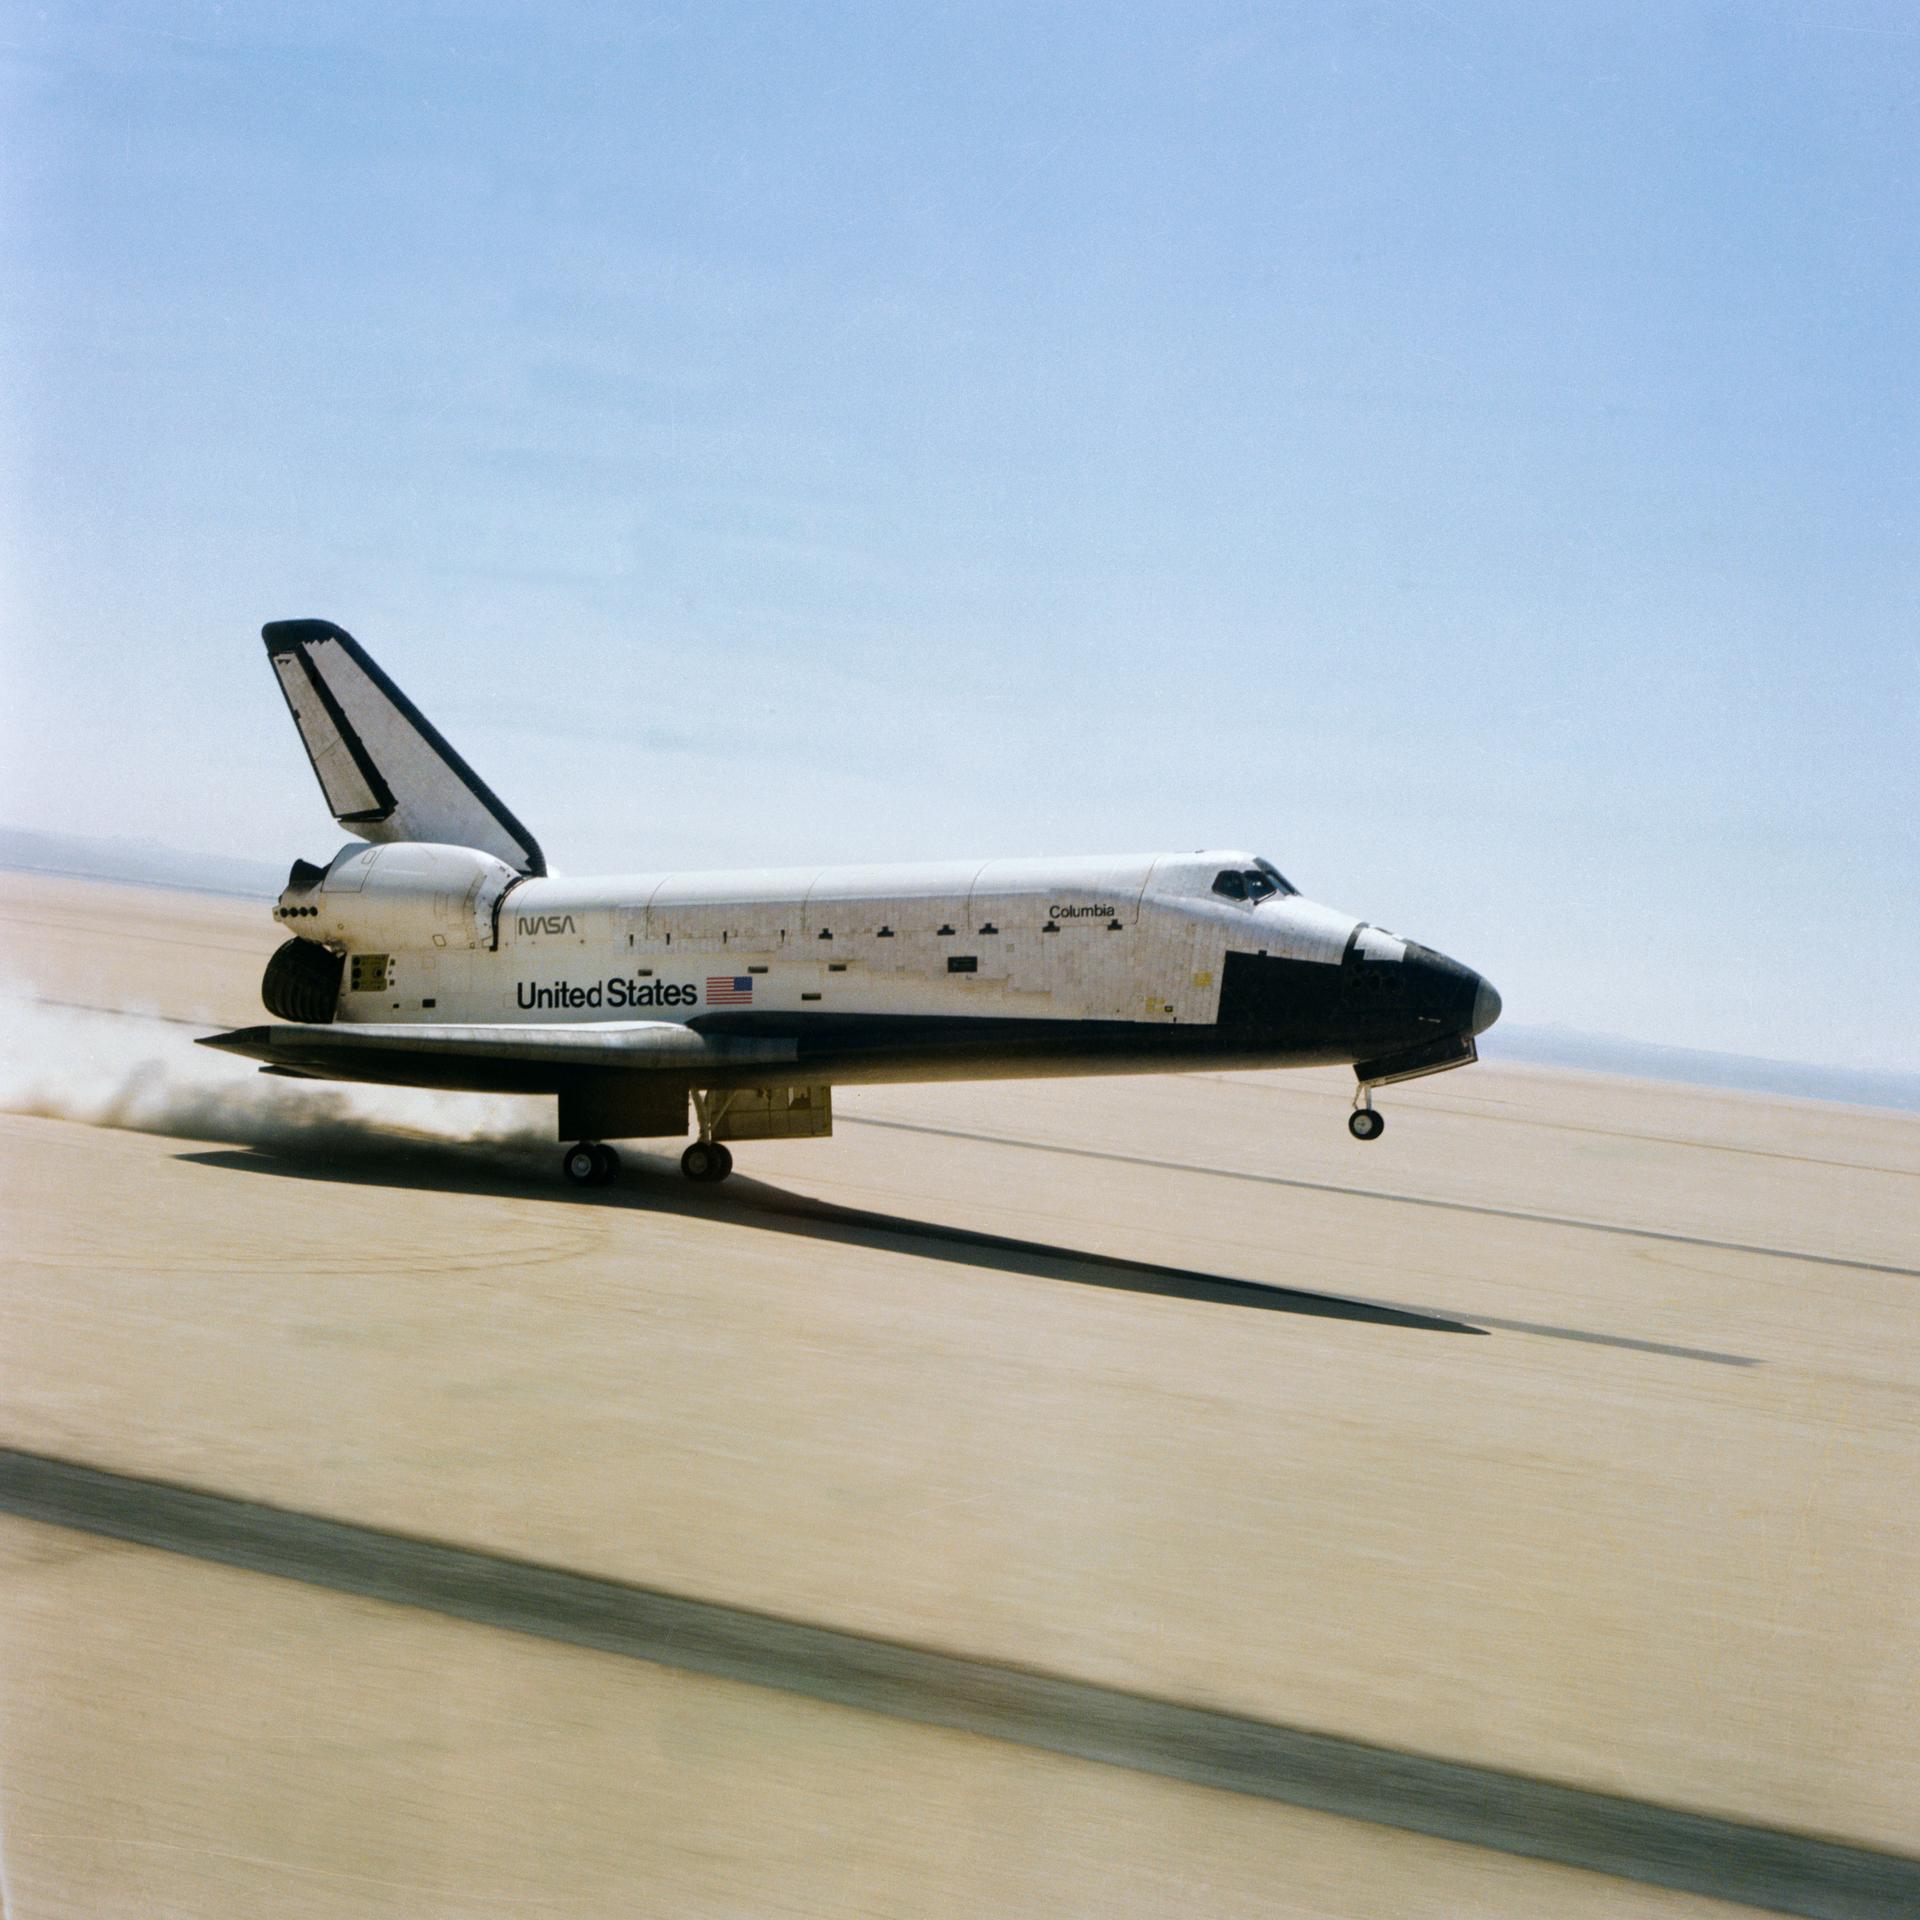 Space Shuttle Columbia landed on April 14, 1981 to conclude the first shuttle mission to space.